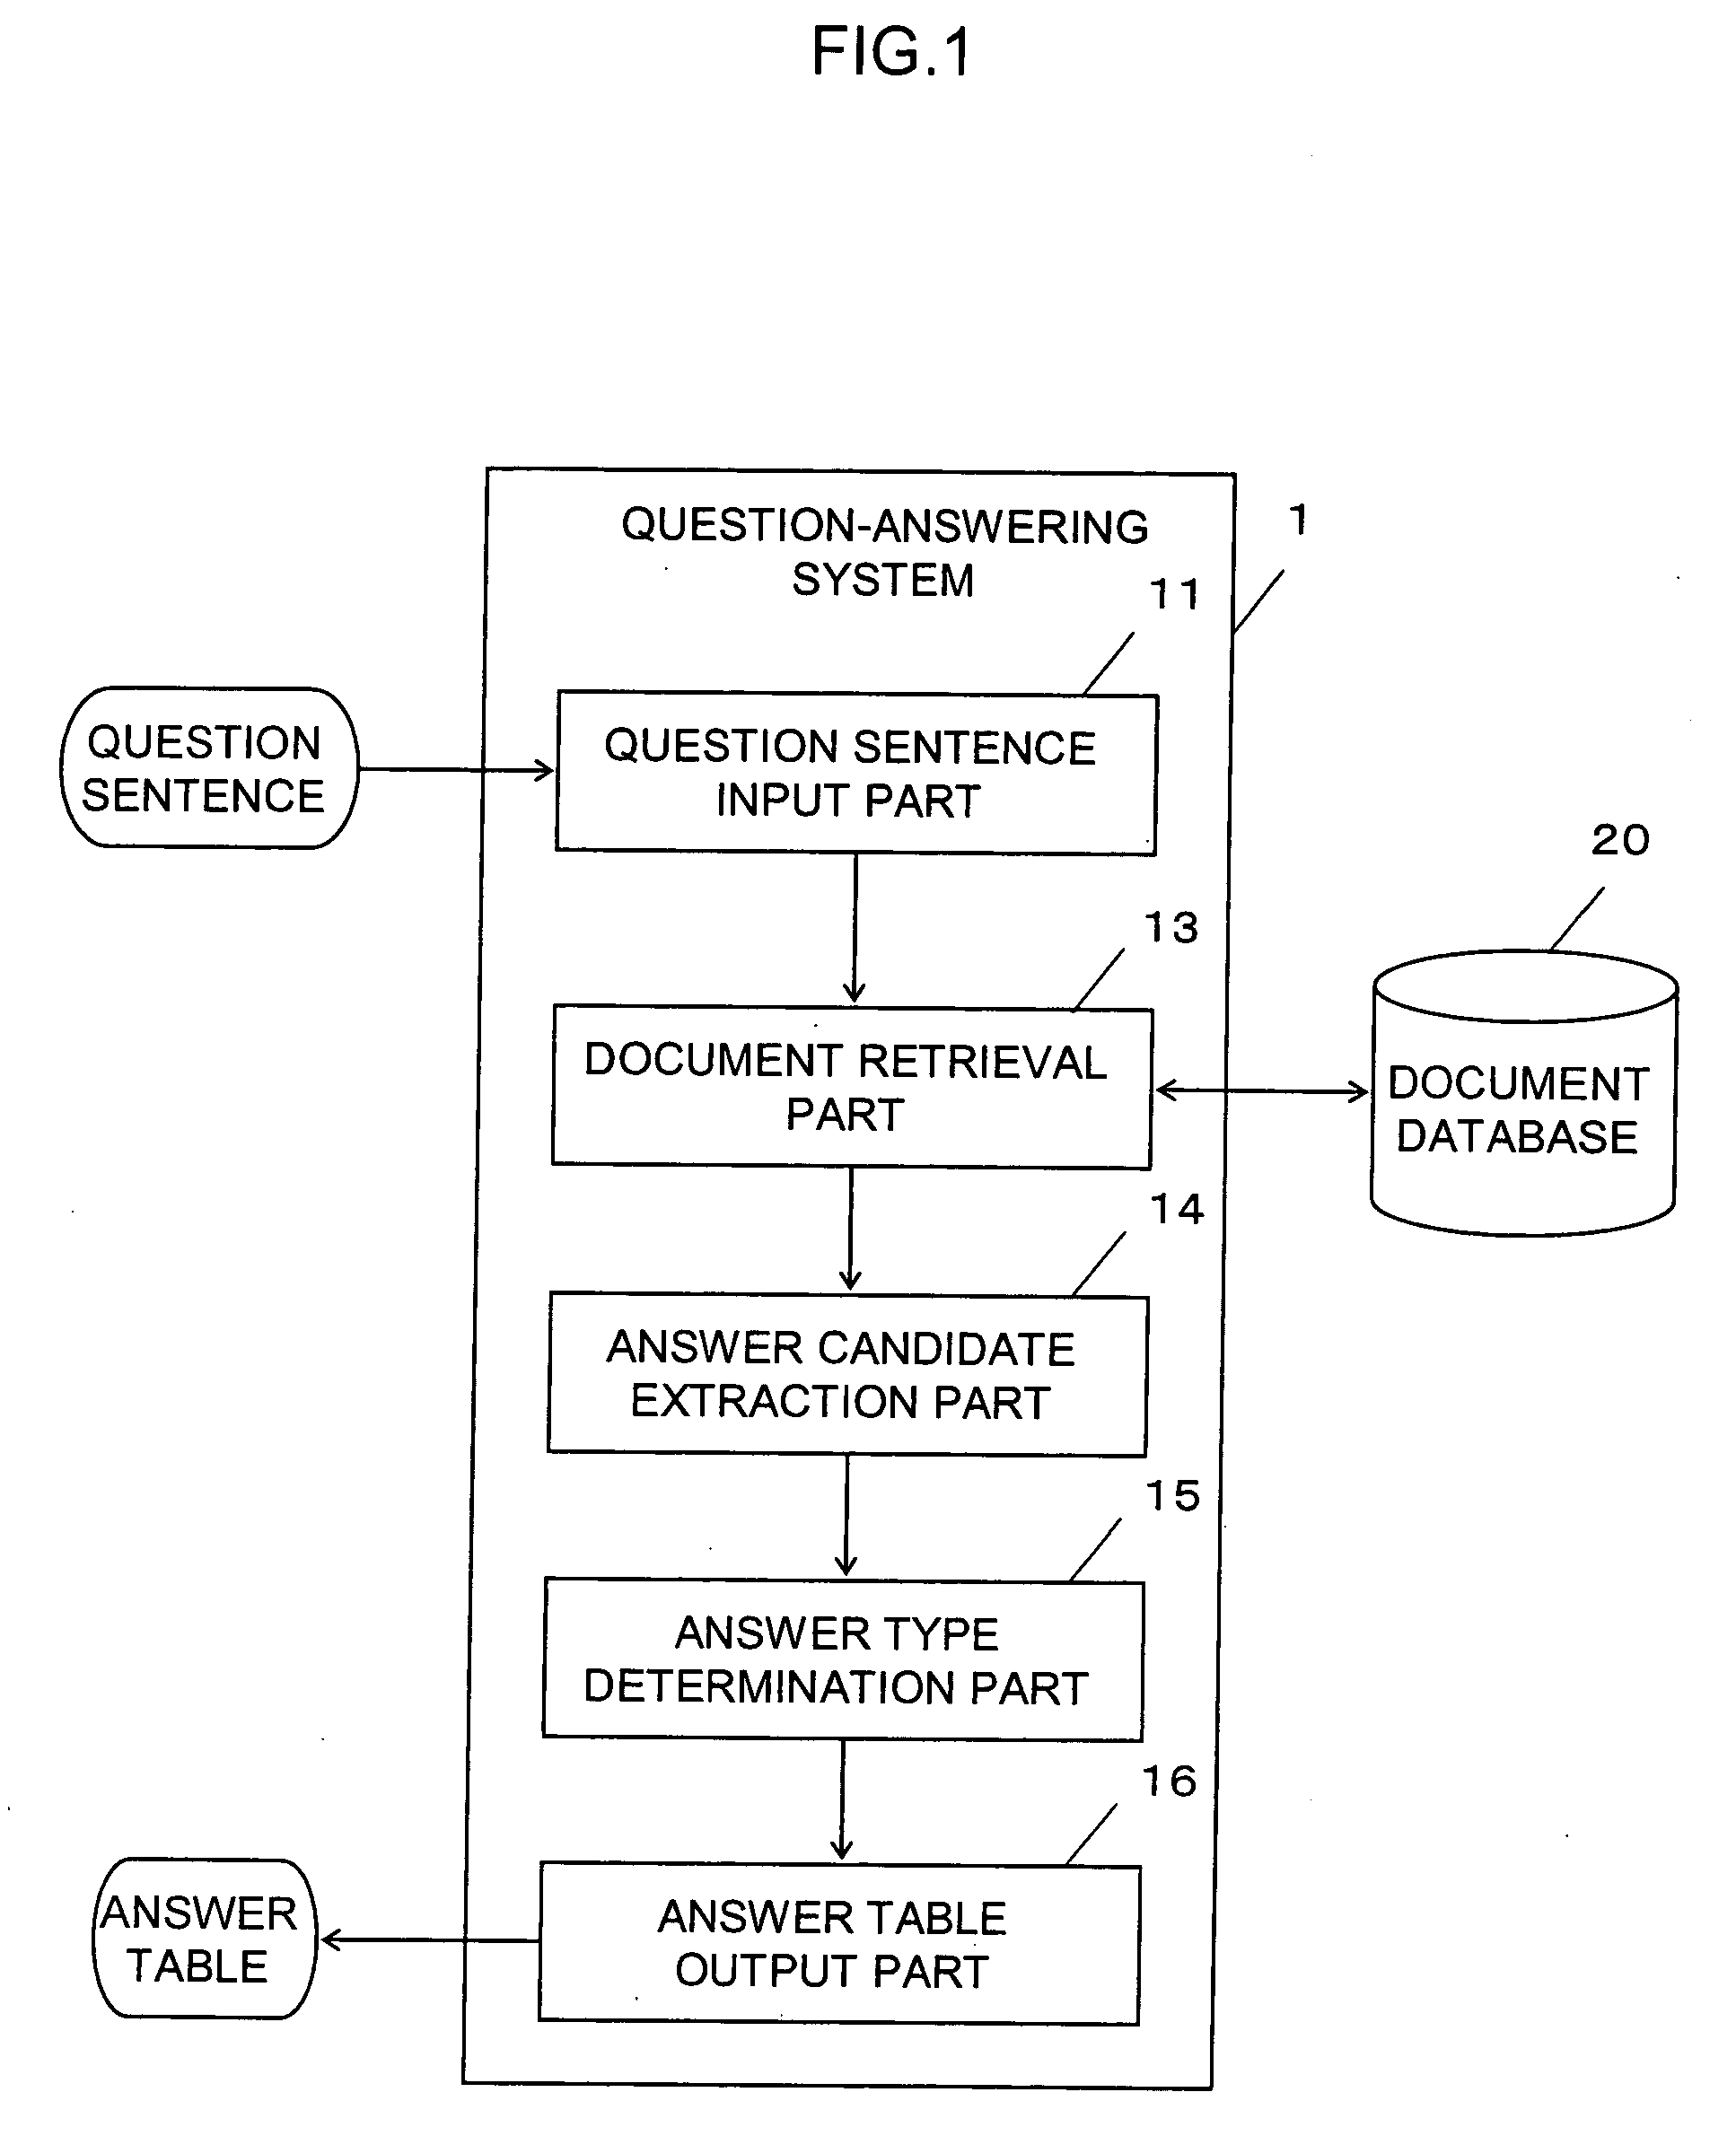 Question-answering system and question-answering processing method